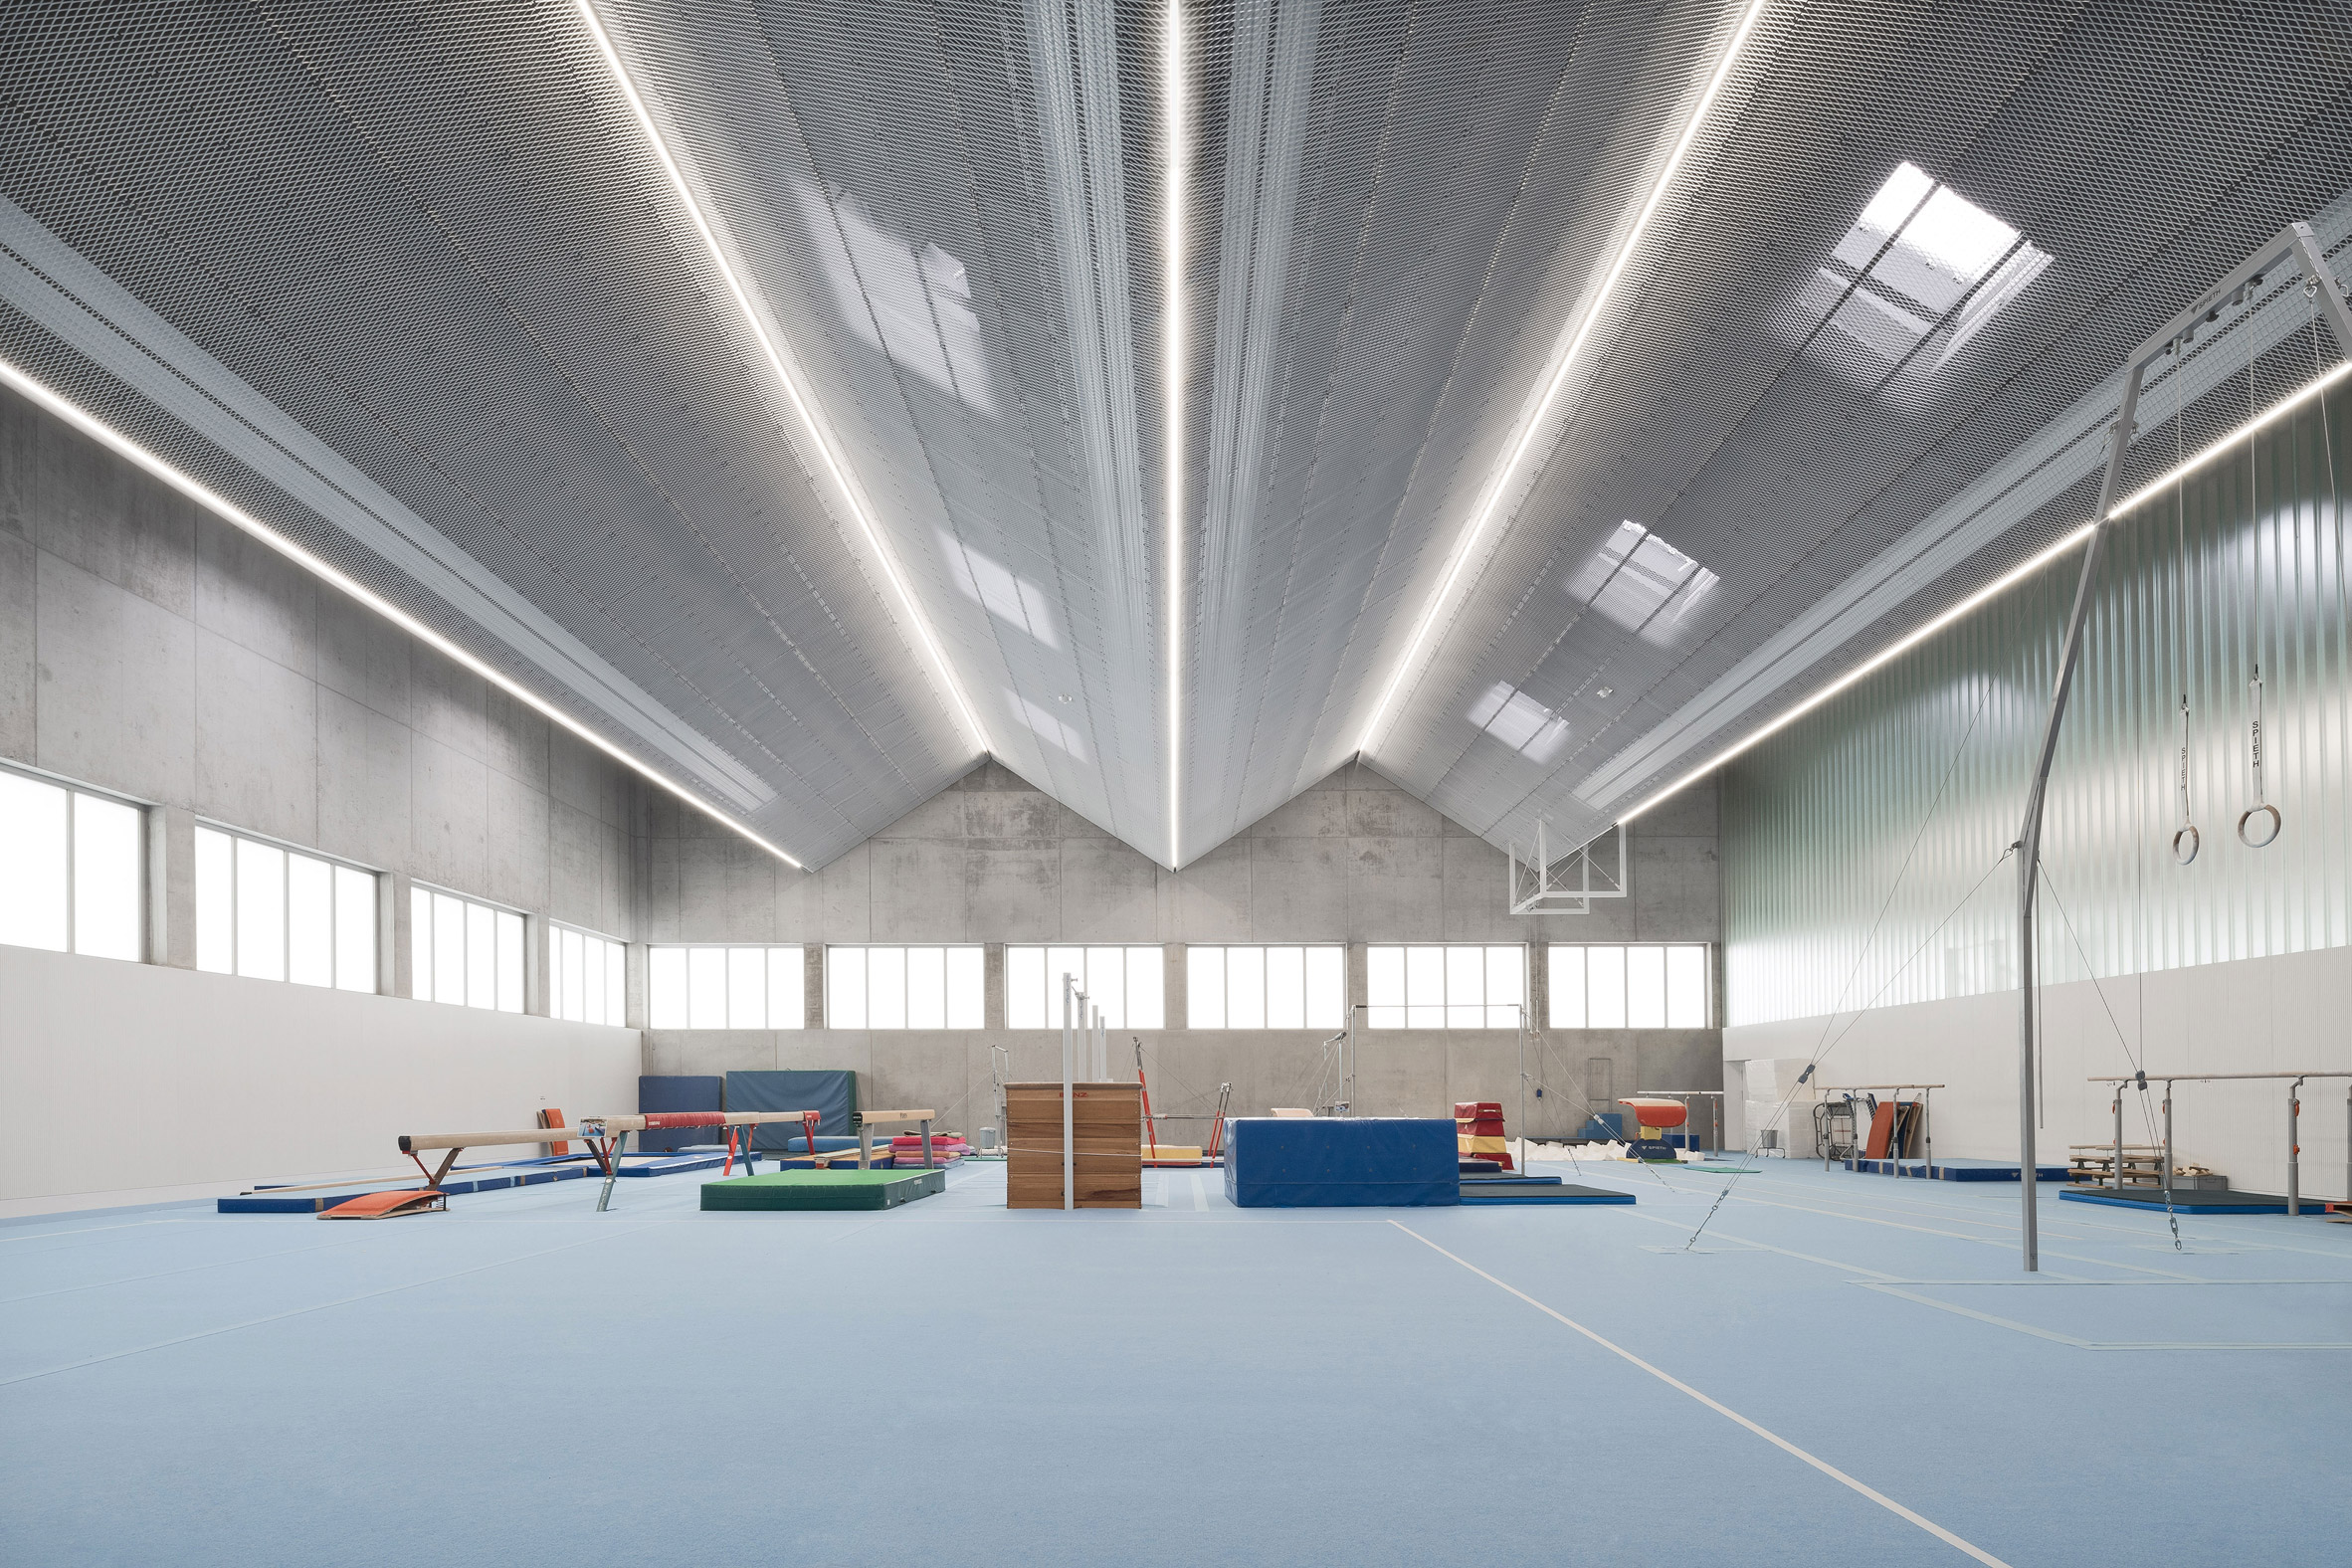 Large gymnasium with a blue floor